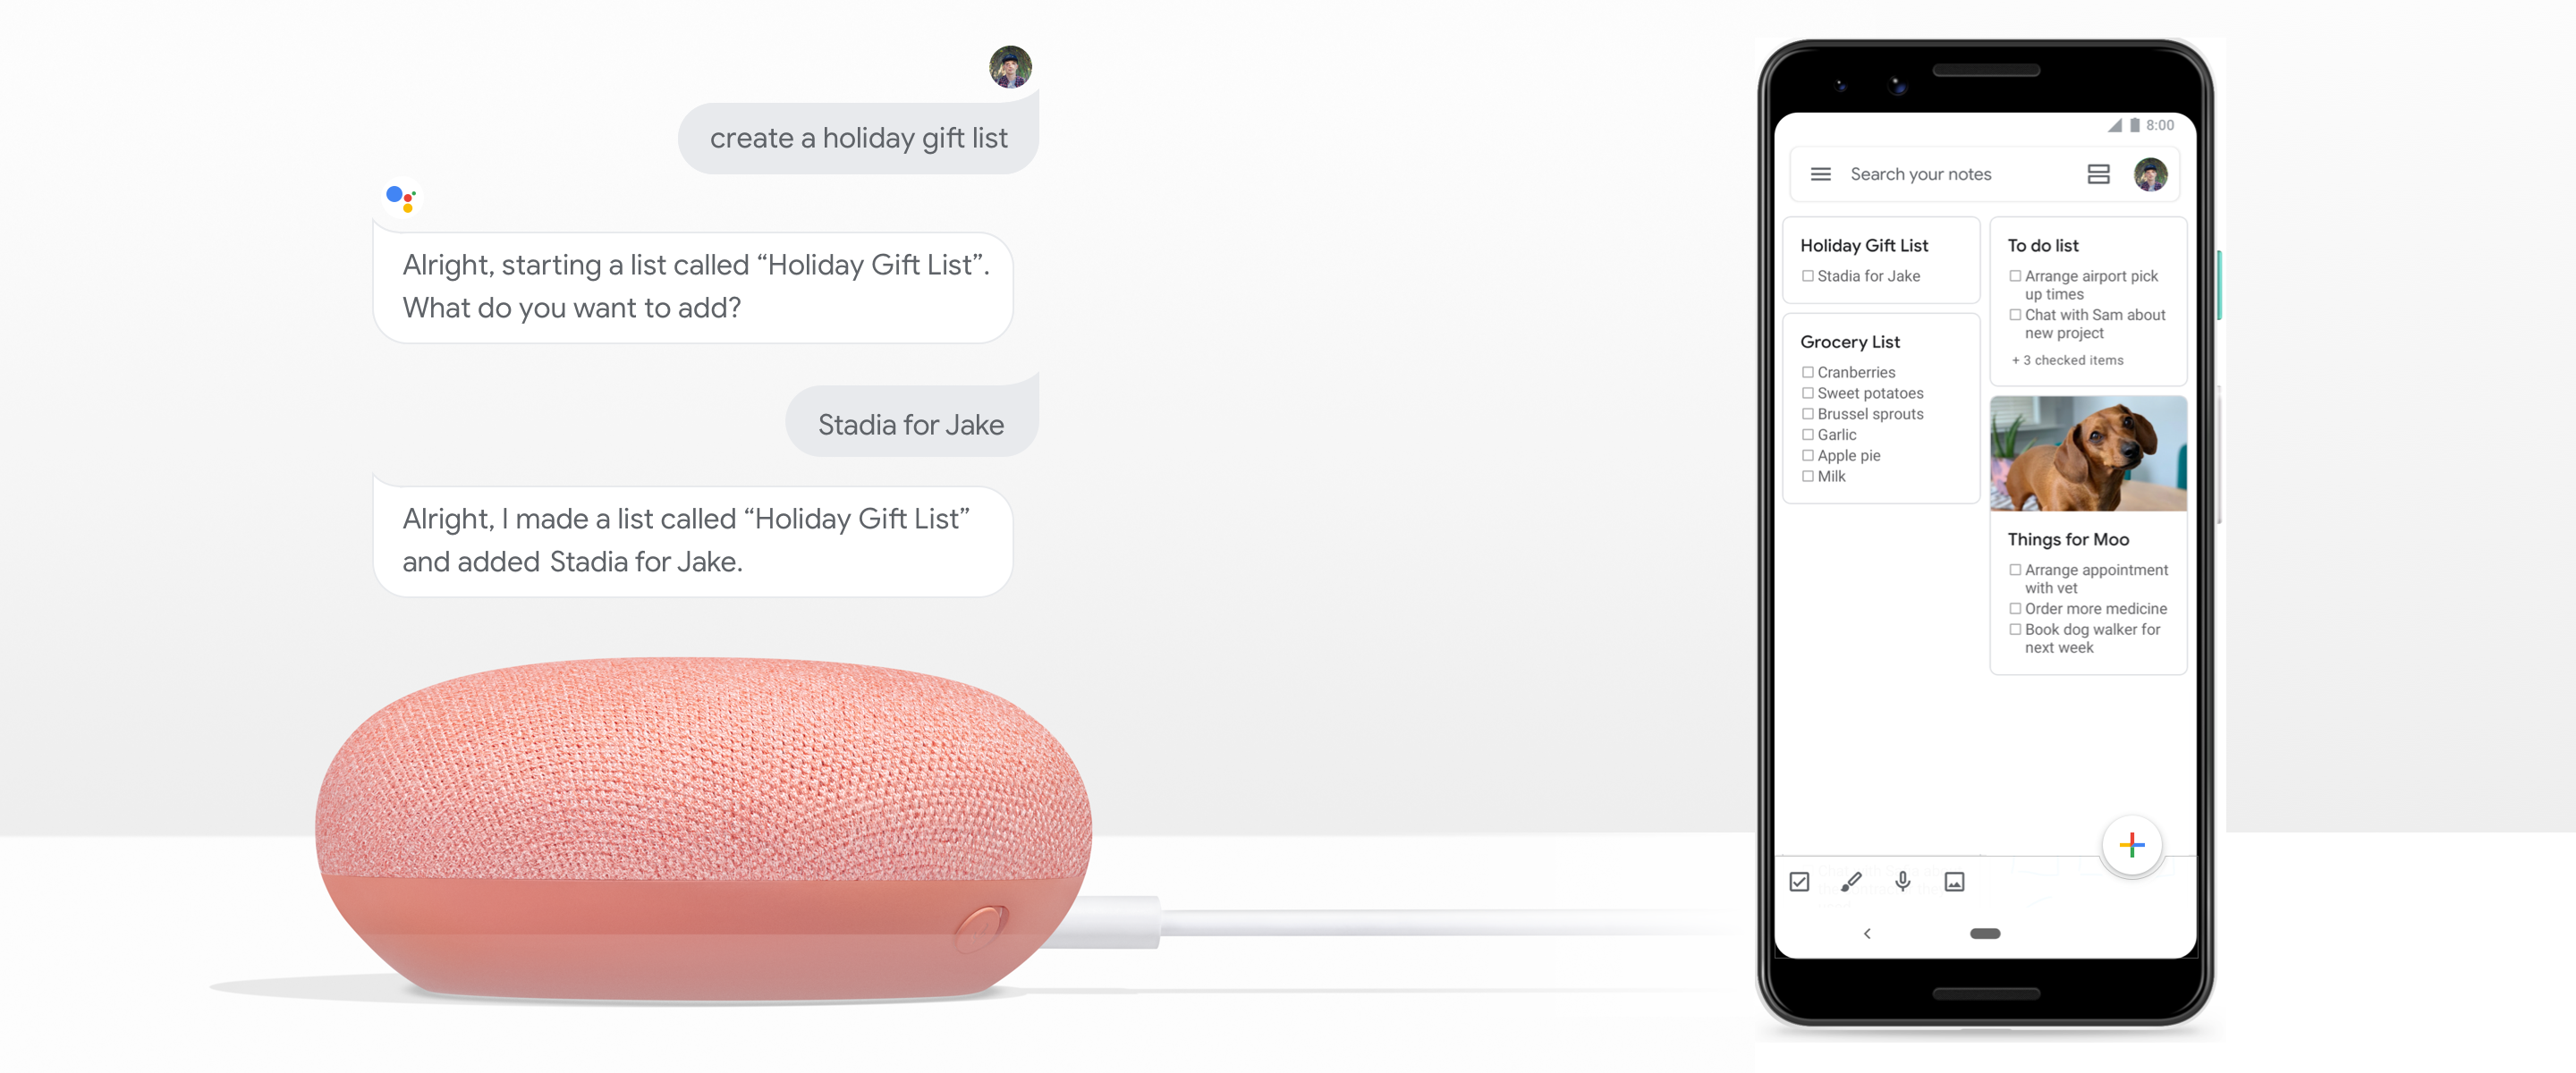 Google Assistant Gets A Big Note Taking Revamp With Support For Several Apps Ars Technica